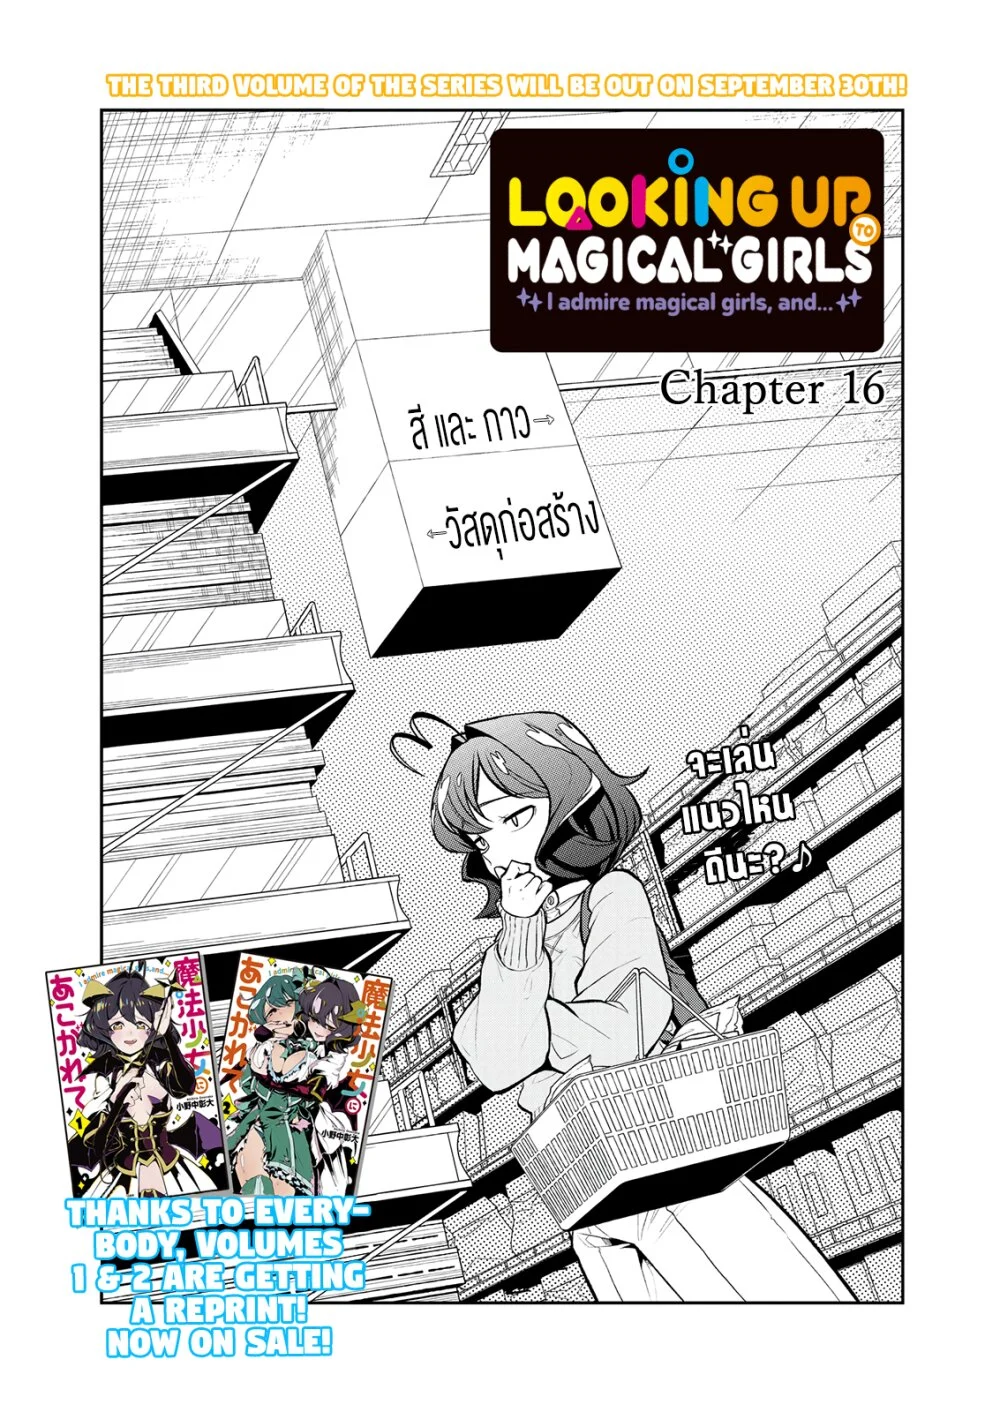 Looking up to Magical Girls 16 (1)